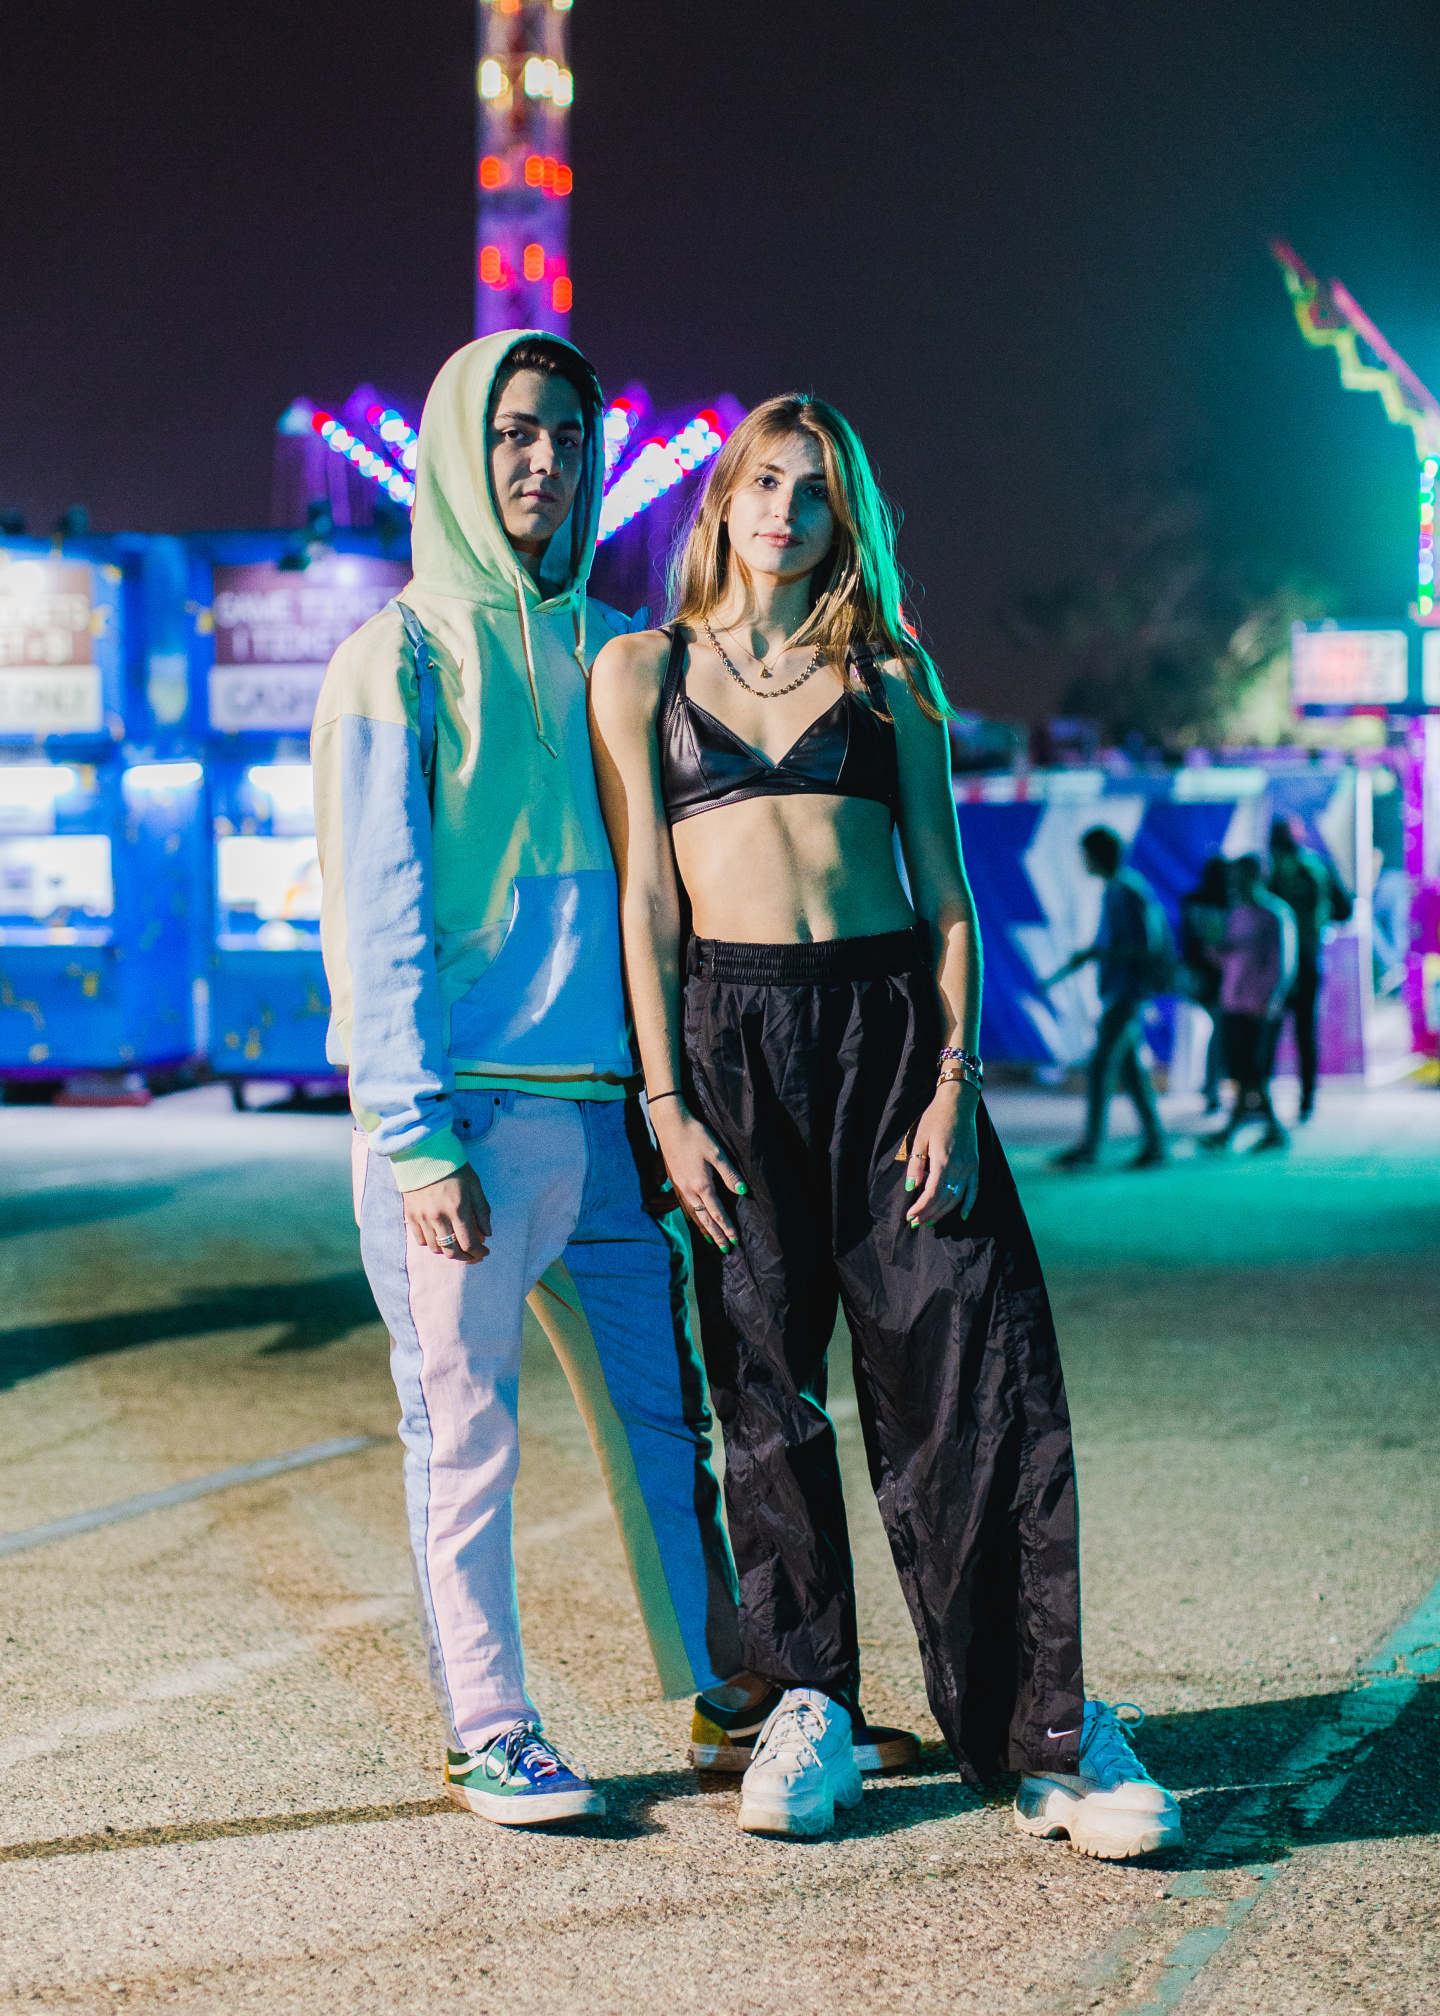 Camp Flog Gnaw attendees blended glamor and comfort perfectly